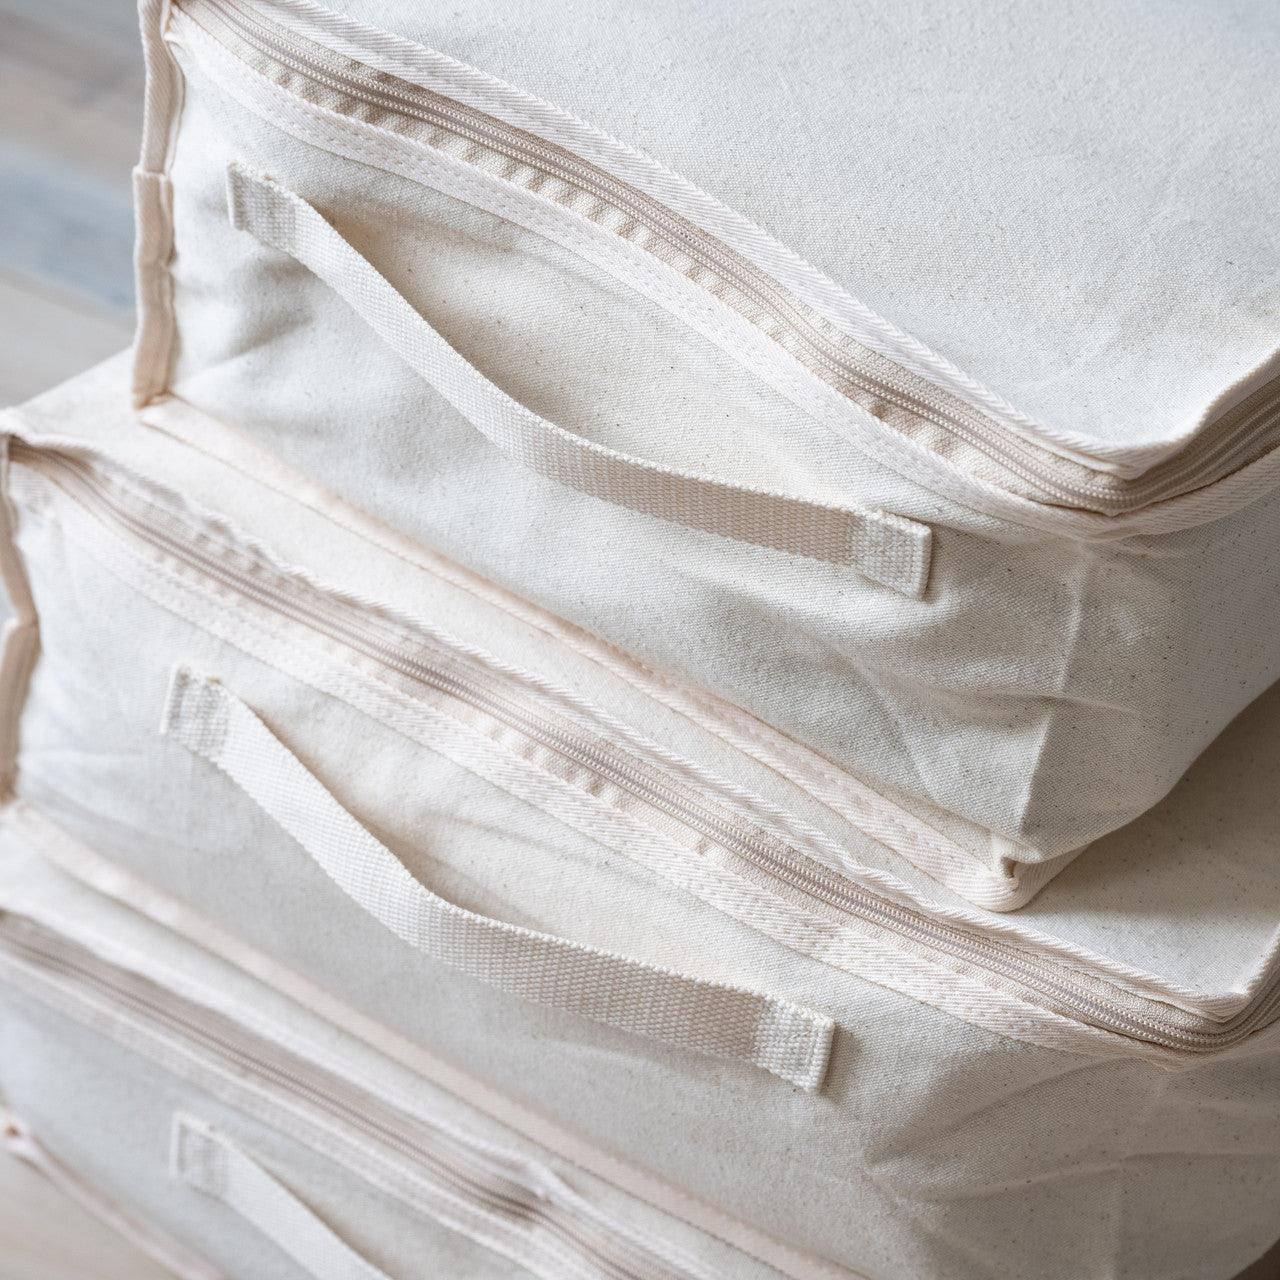 Clothing Storage Bags - 10oz Thick With 100% Pure Cotton - X-Large - Hangersforless